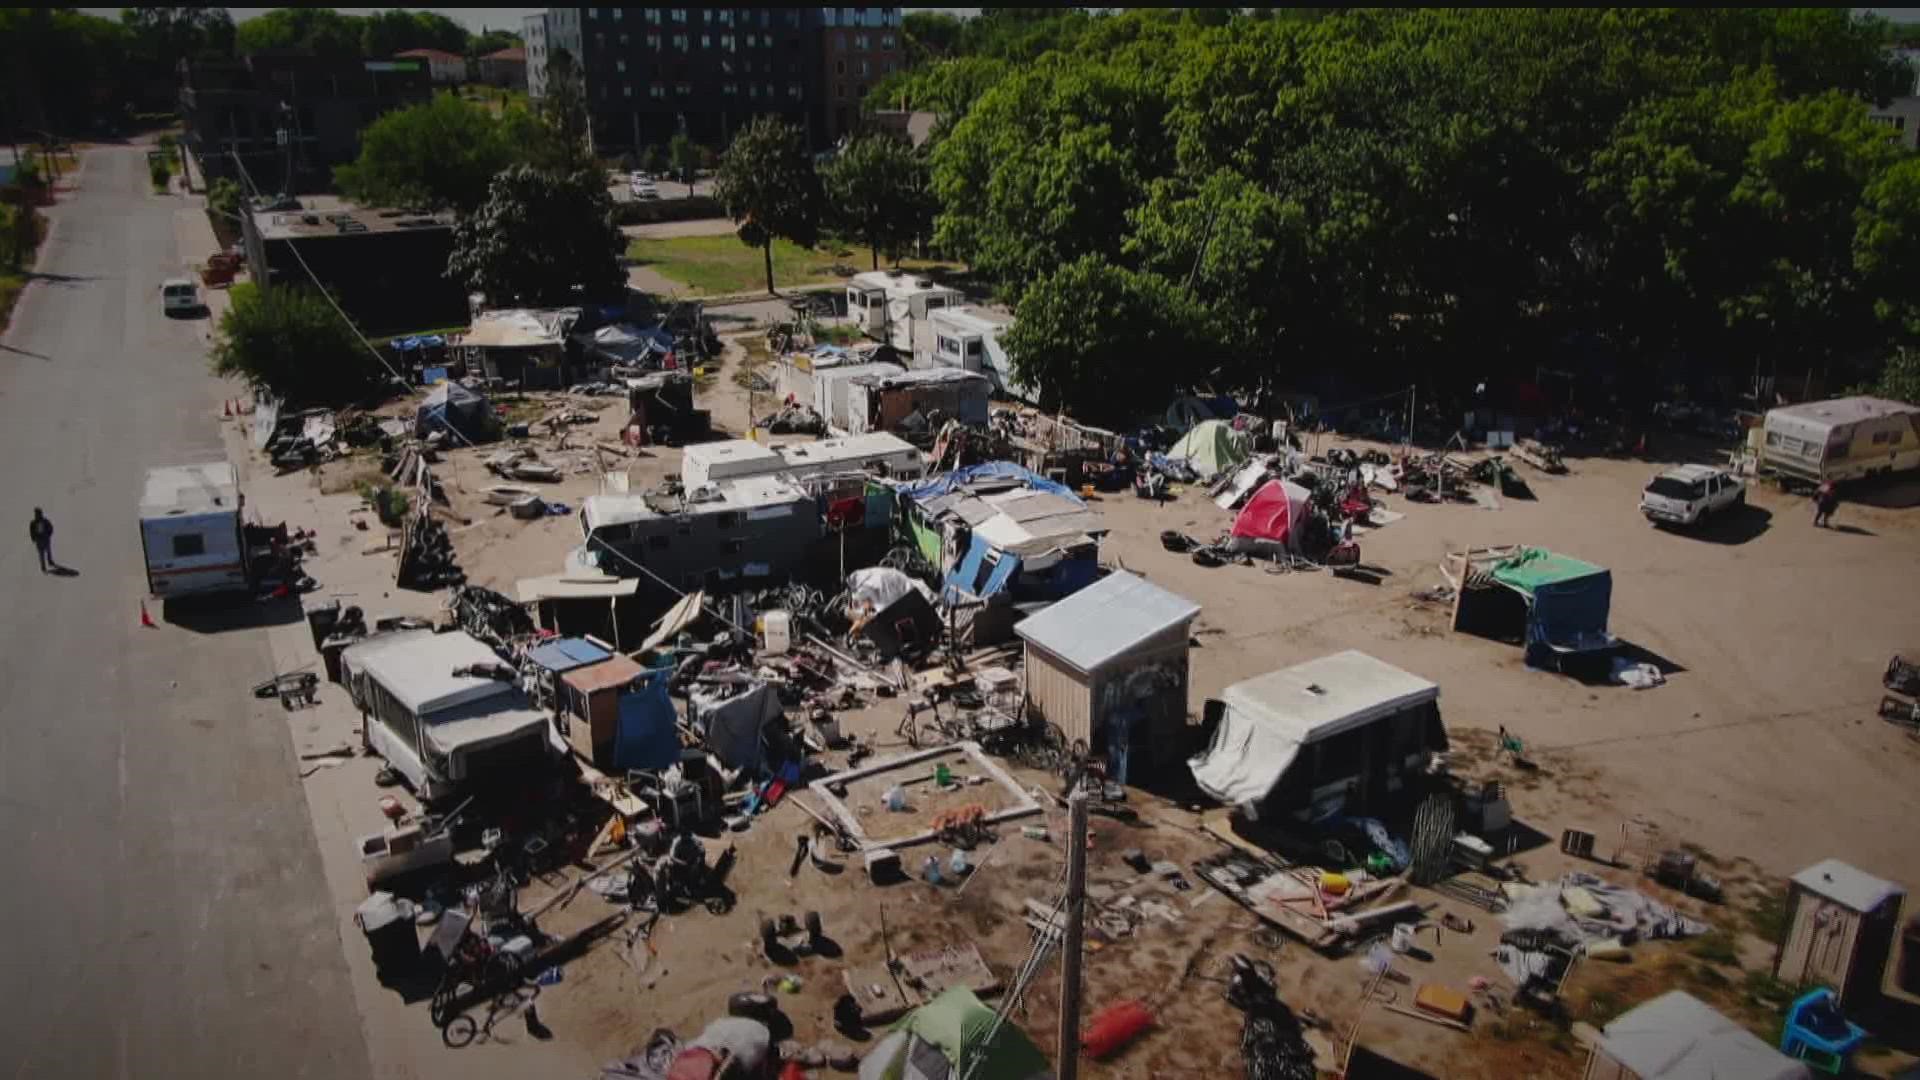 A Minneapolis husband-wife property management team was forced to investigate the theft of their property themselves as police deemed the encampment "too hostile."